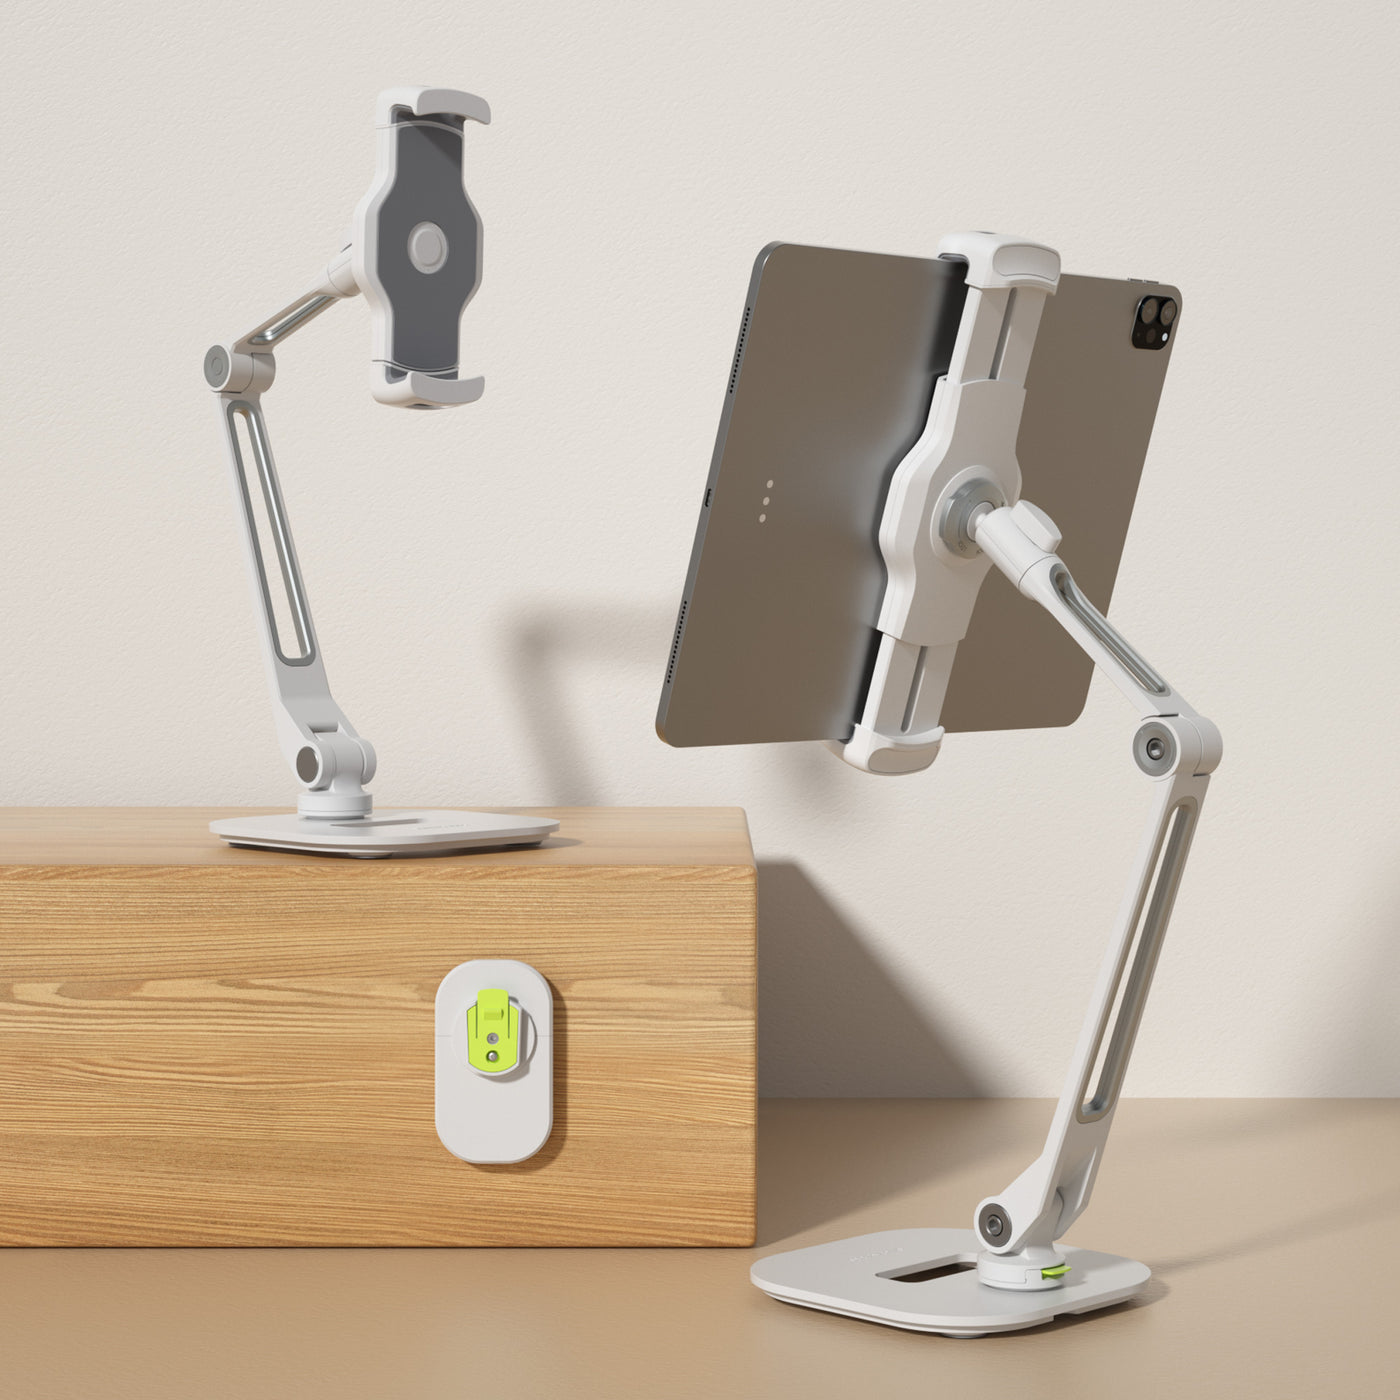 Easy Mount - Detachable Tablet & Cell Phone Holder (Long Arm / Stand Base + Wall Base)